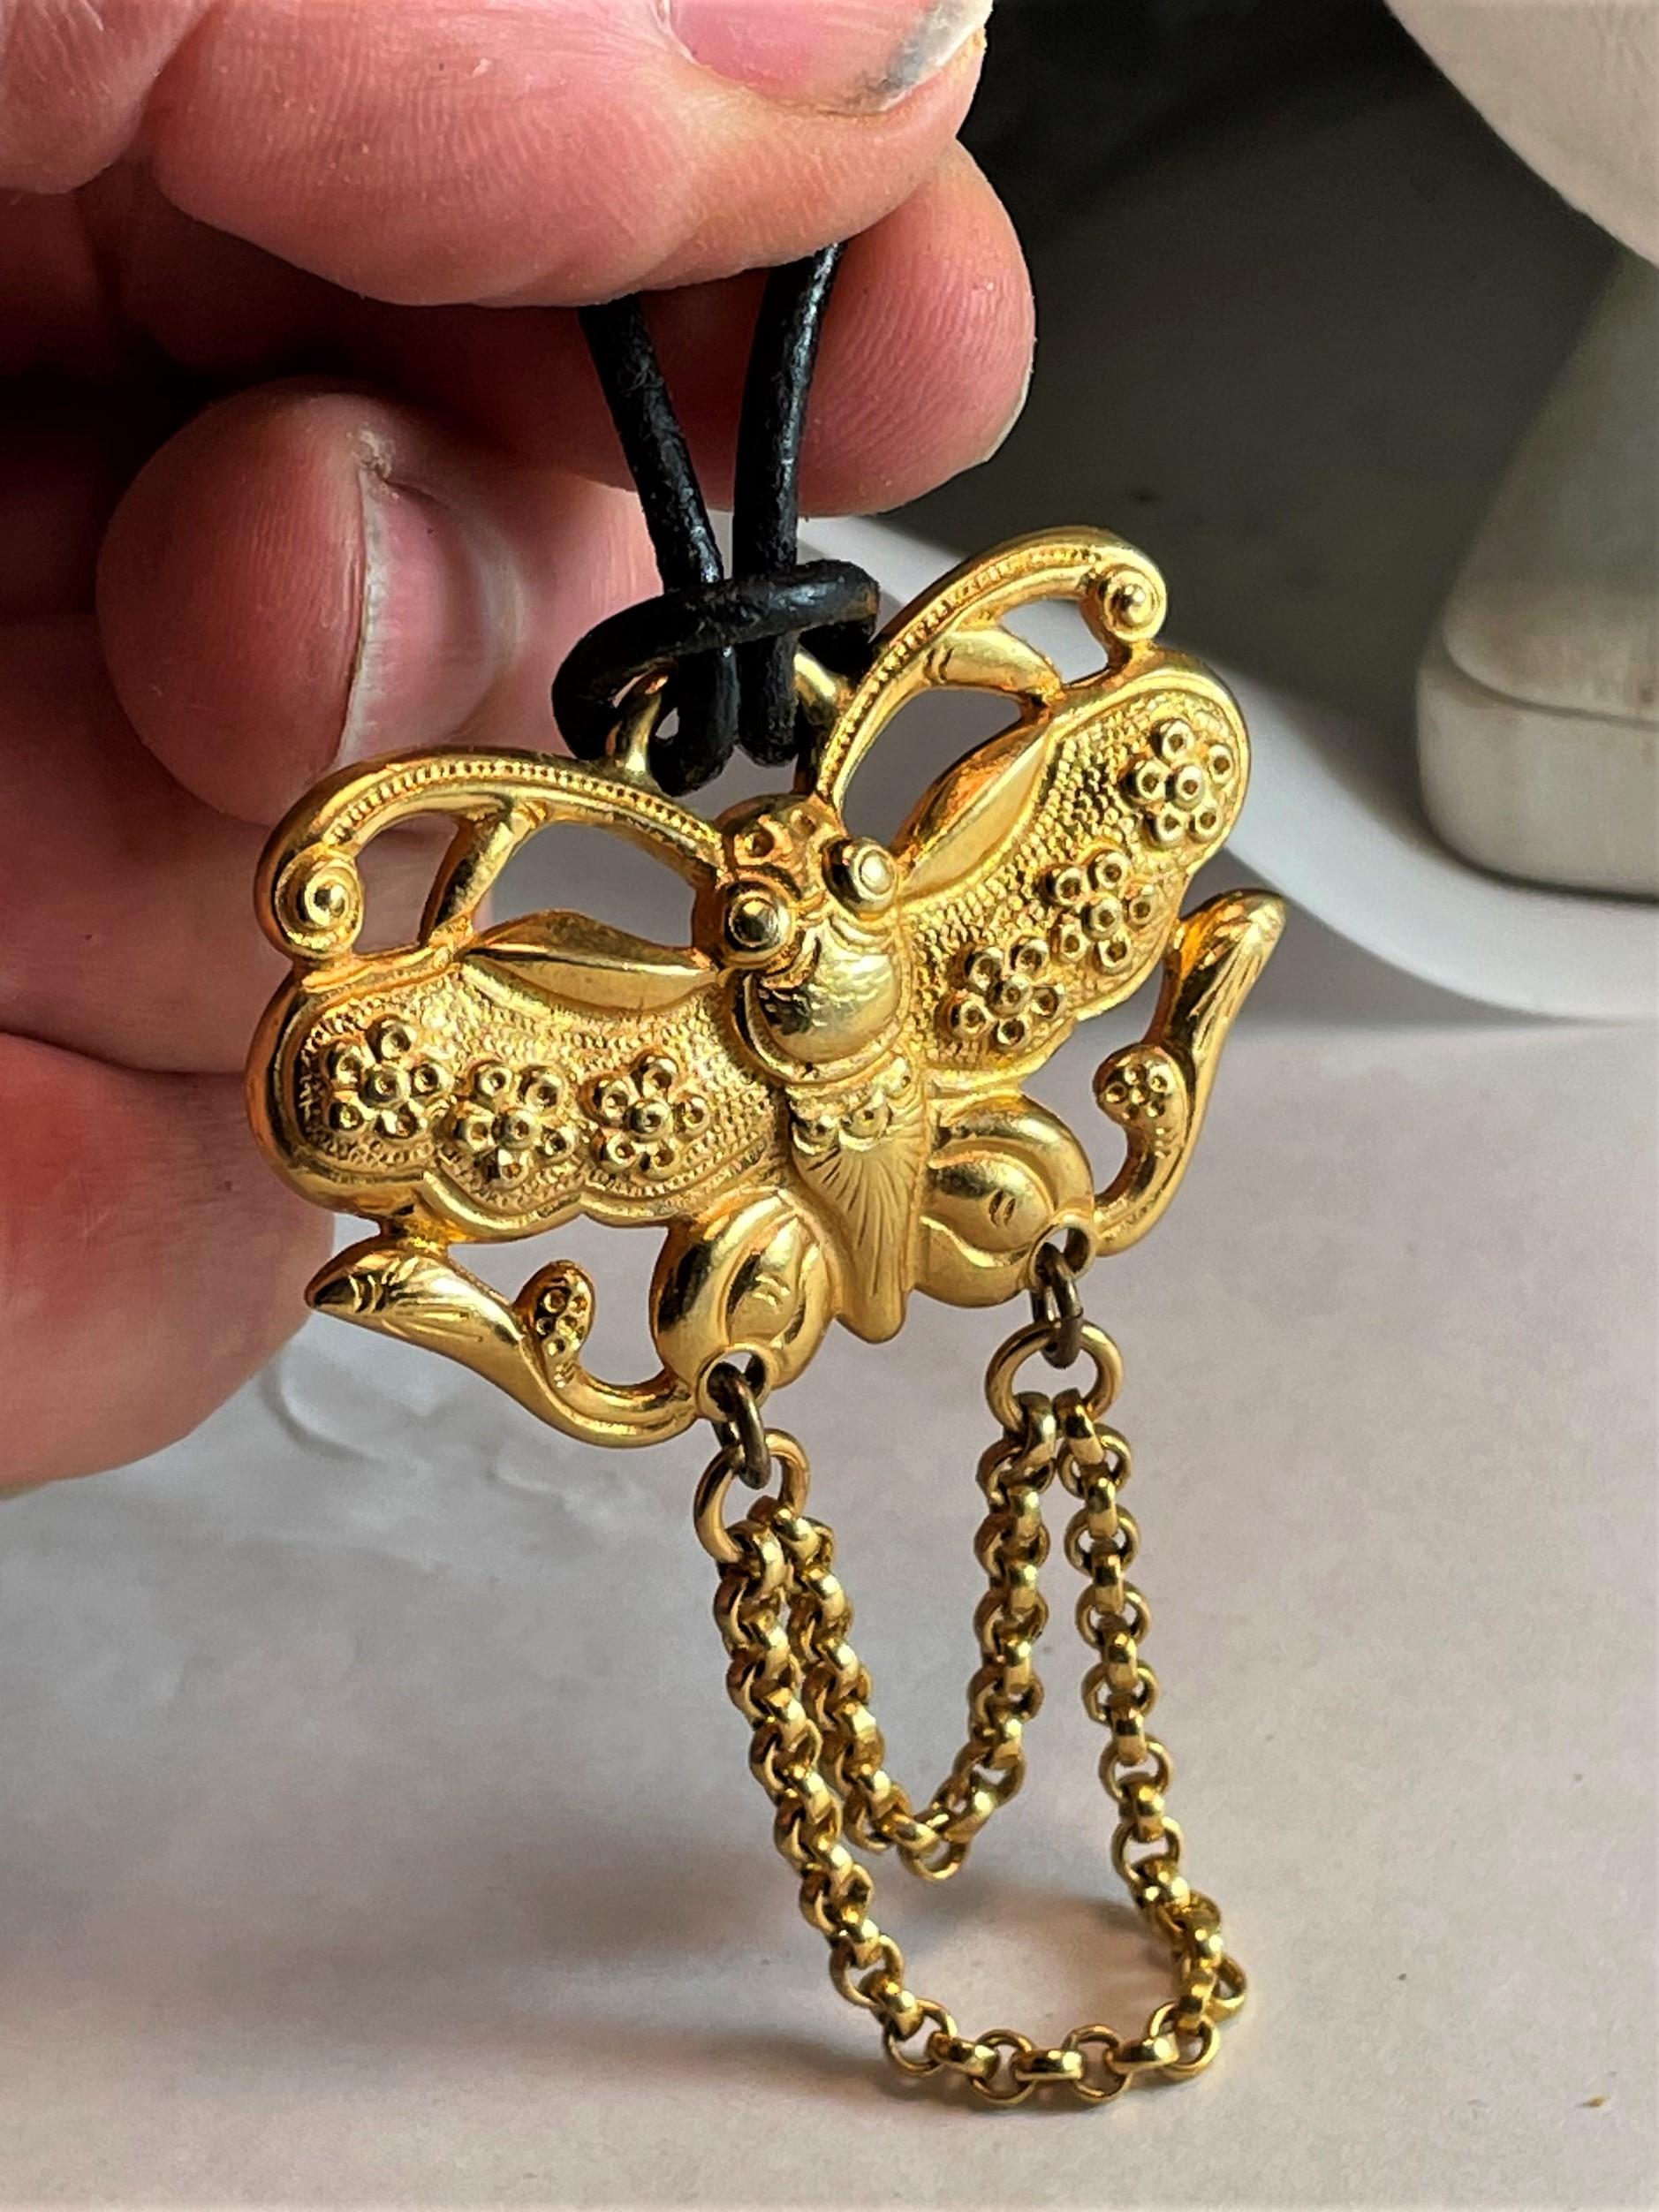 What an exotic bright gold pendant of a fancy butterfly with exaggerated antenna 0n the top and legs on the bottom. There are raised flowers on the wings, a beetle head and eyes and a double strand rolo chain dangling below, giving it a mythical